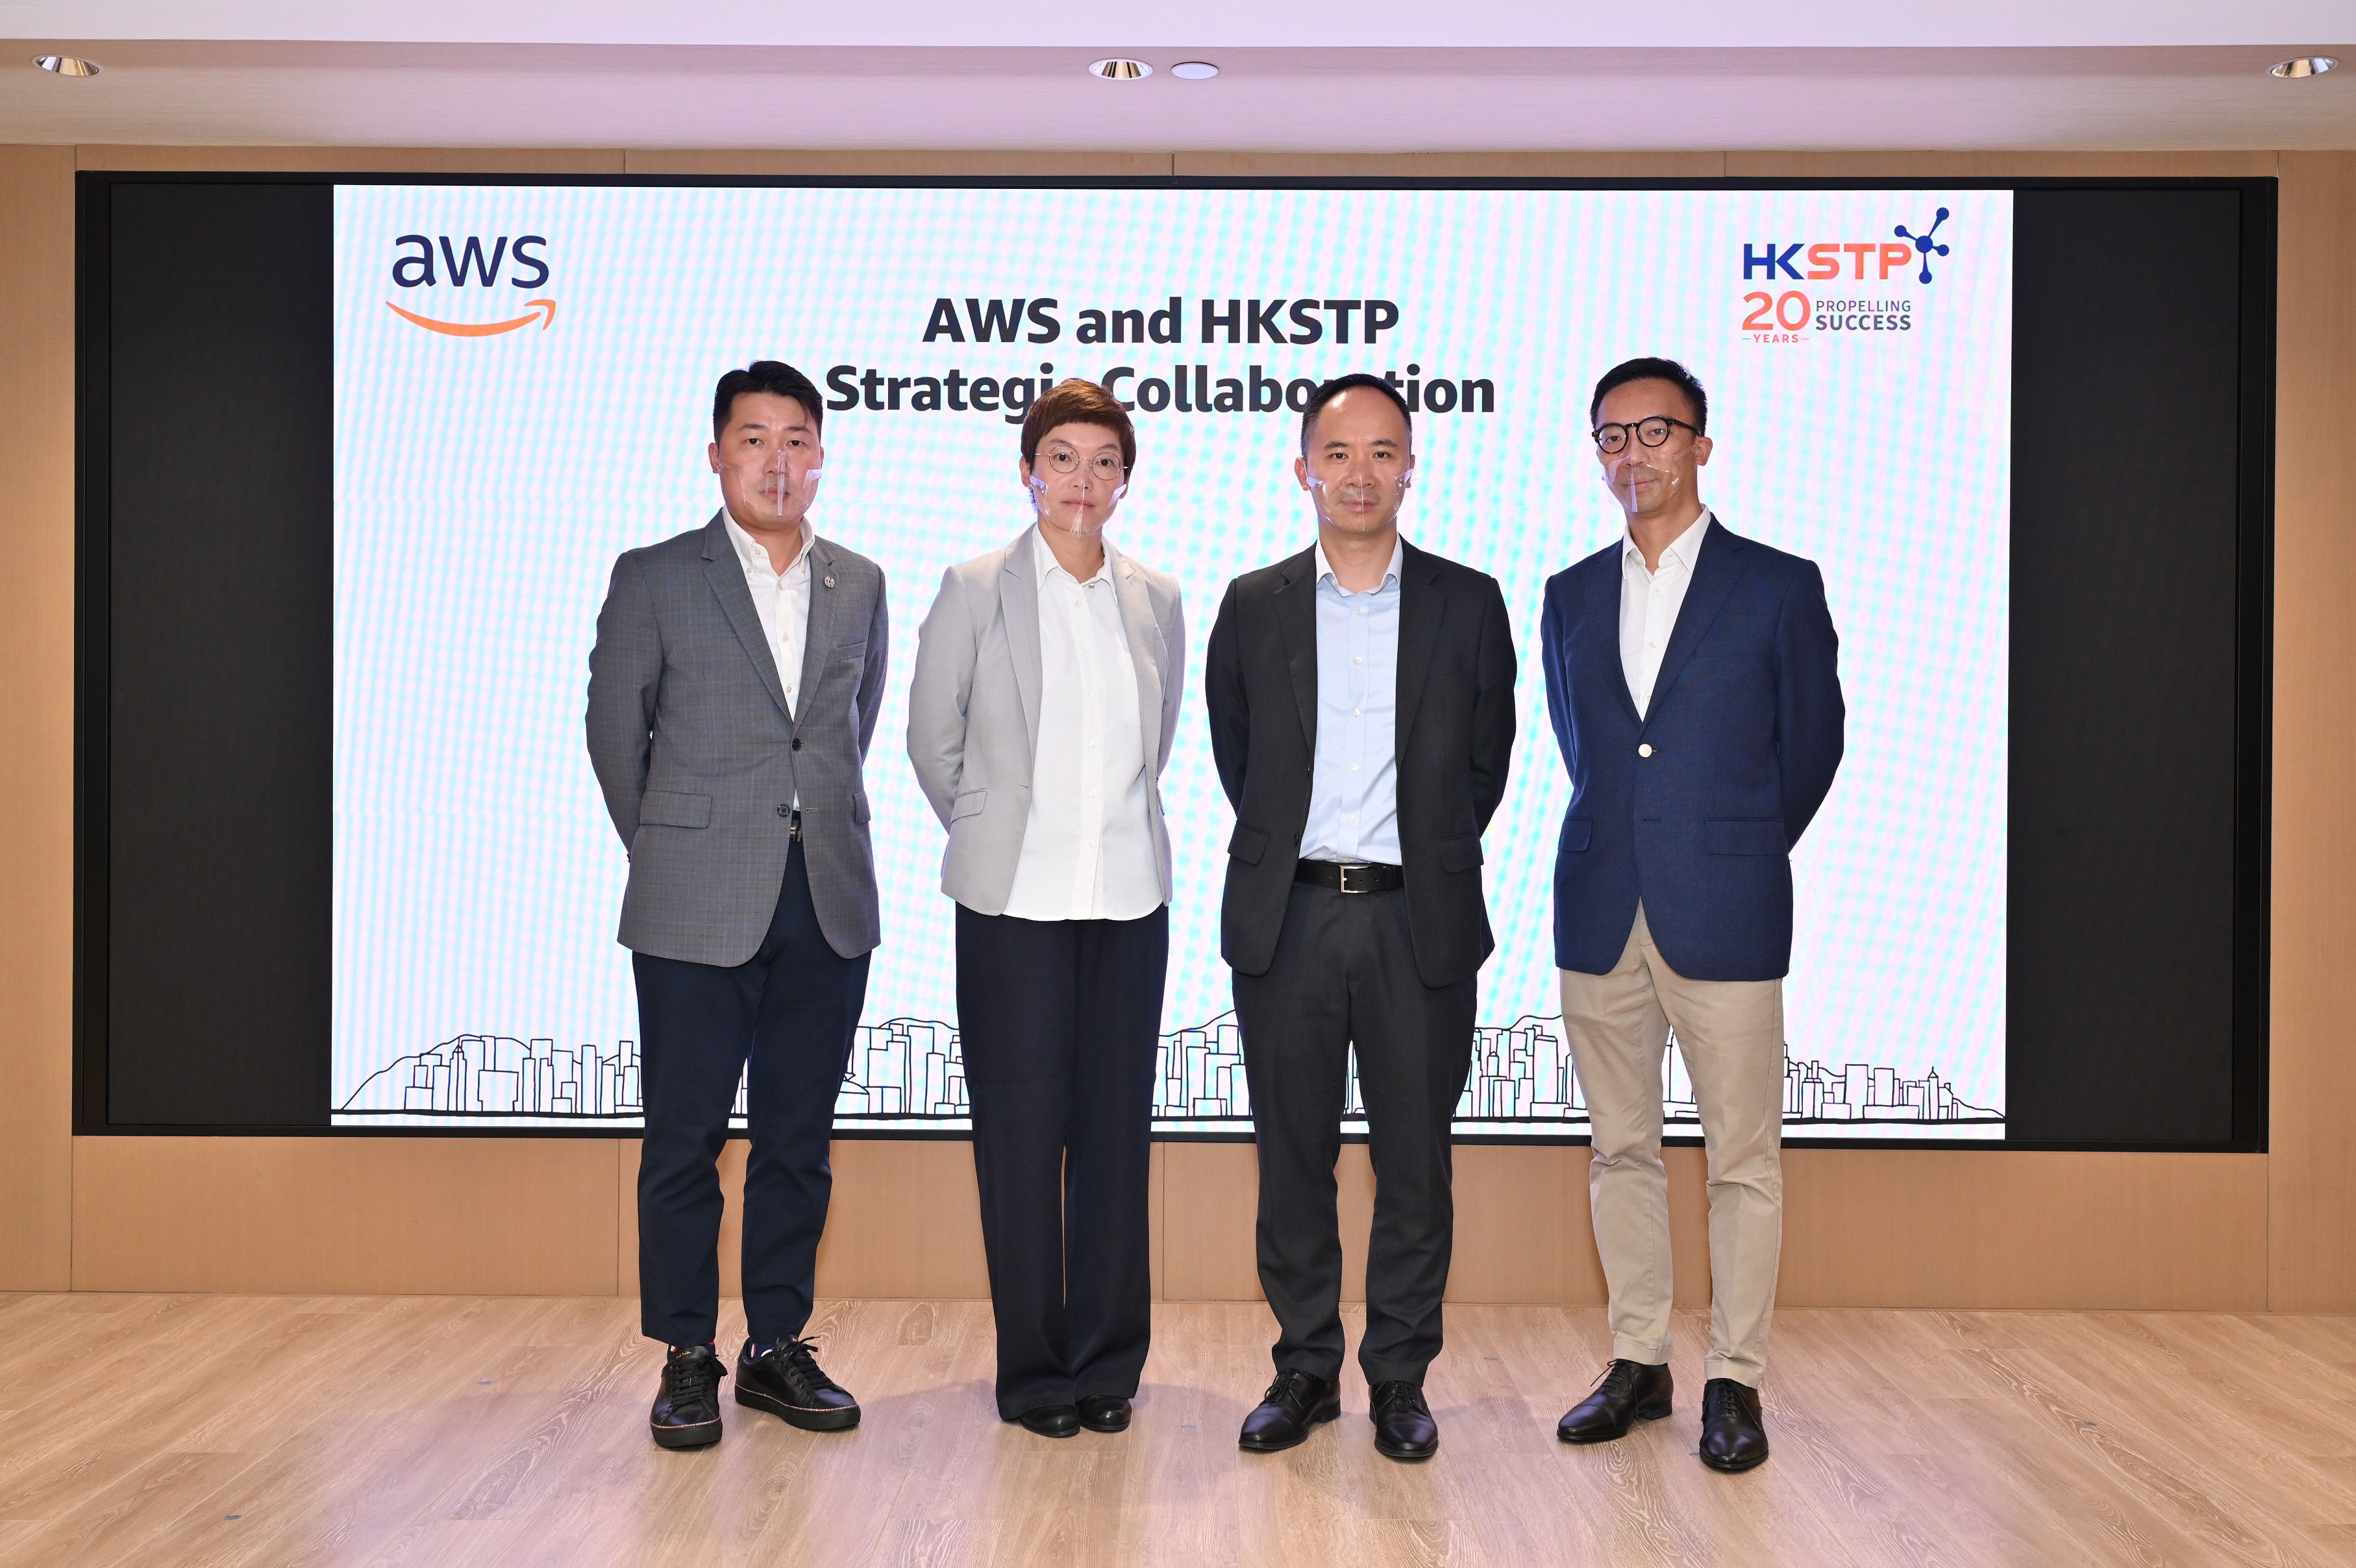 AWS and HKSTP announced a strategic collaboration today to accelerate Innovation and Technology development in Hong Kong. Present at the press conference were (from left to right) Michael Au, Assistant Director, Partnerships, HKSTP; Dr. Crystal Fok, Head of STP Platform, HKSTP; Chris So, Head of Business and Partner, Hong Kong, AWS; Perkins Ho, Senior Business Development Manager, Strategic Programs, Hong Kong & Taiwan, AWS